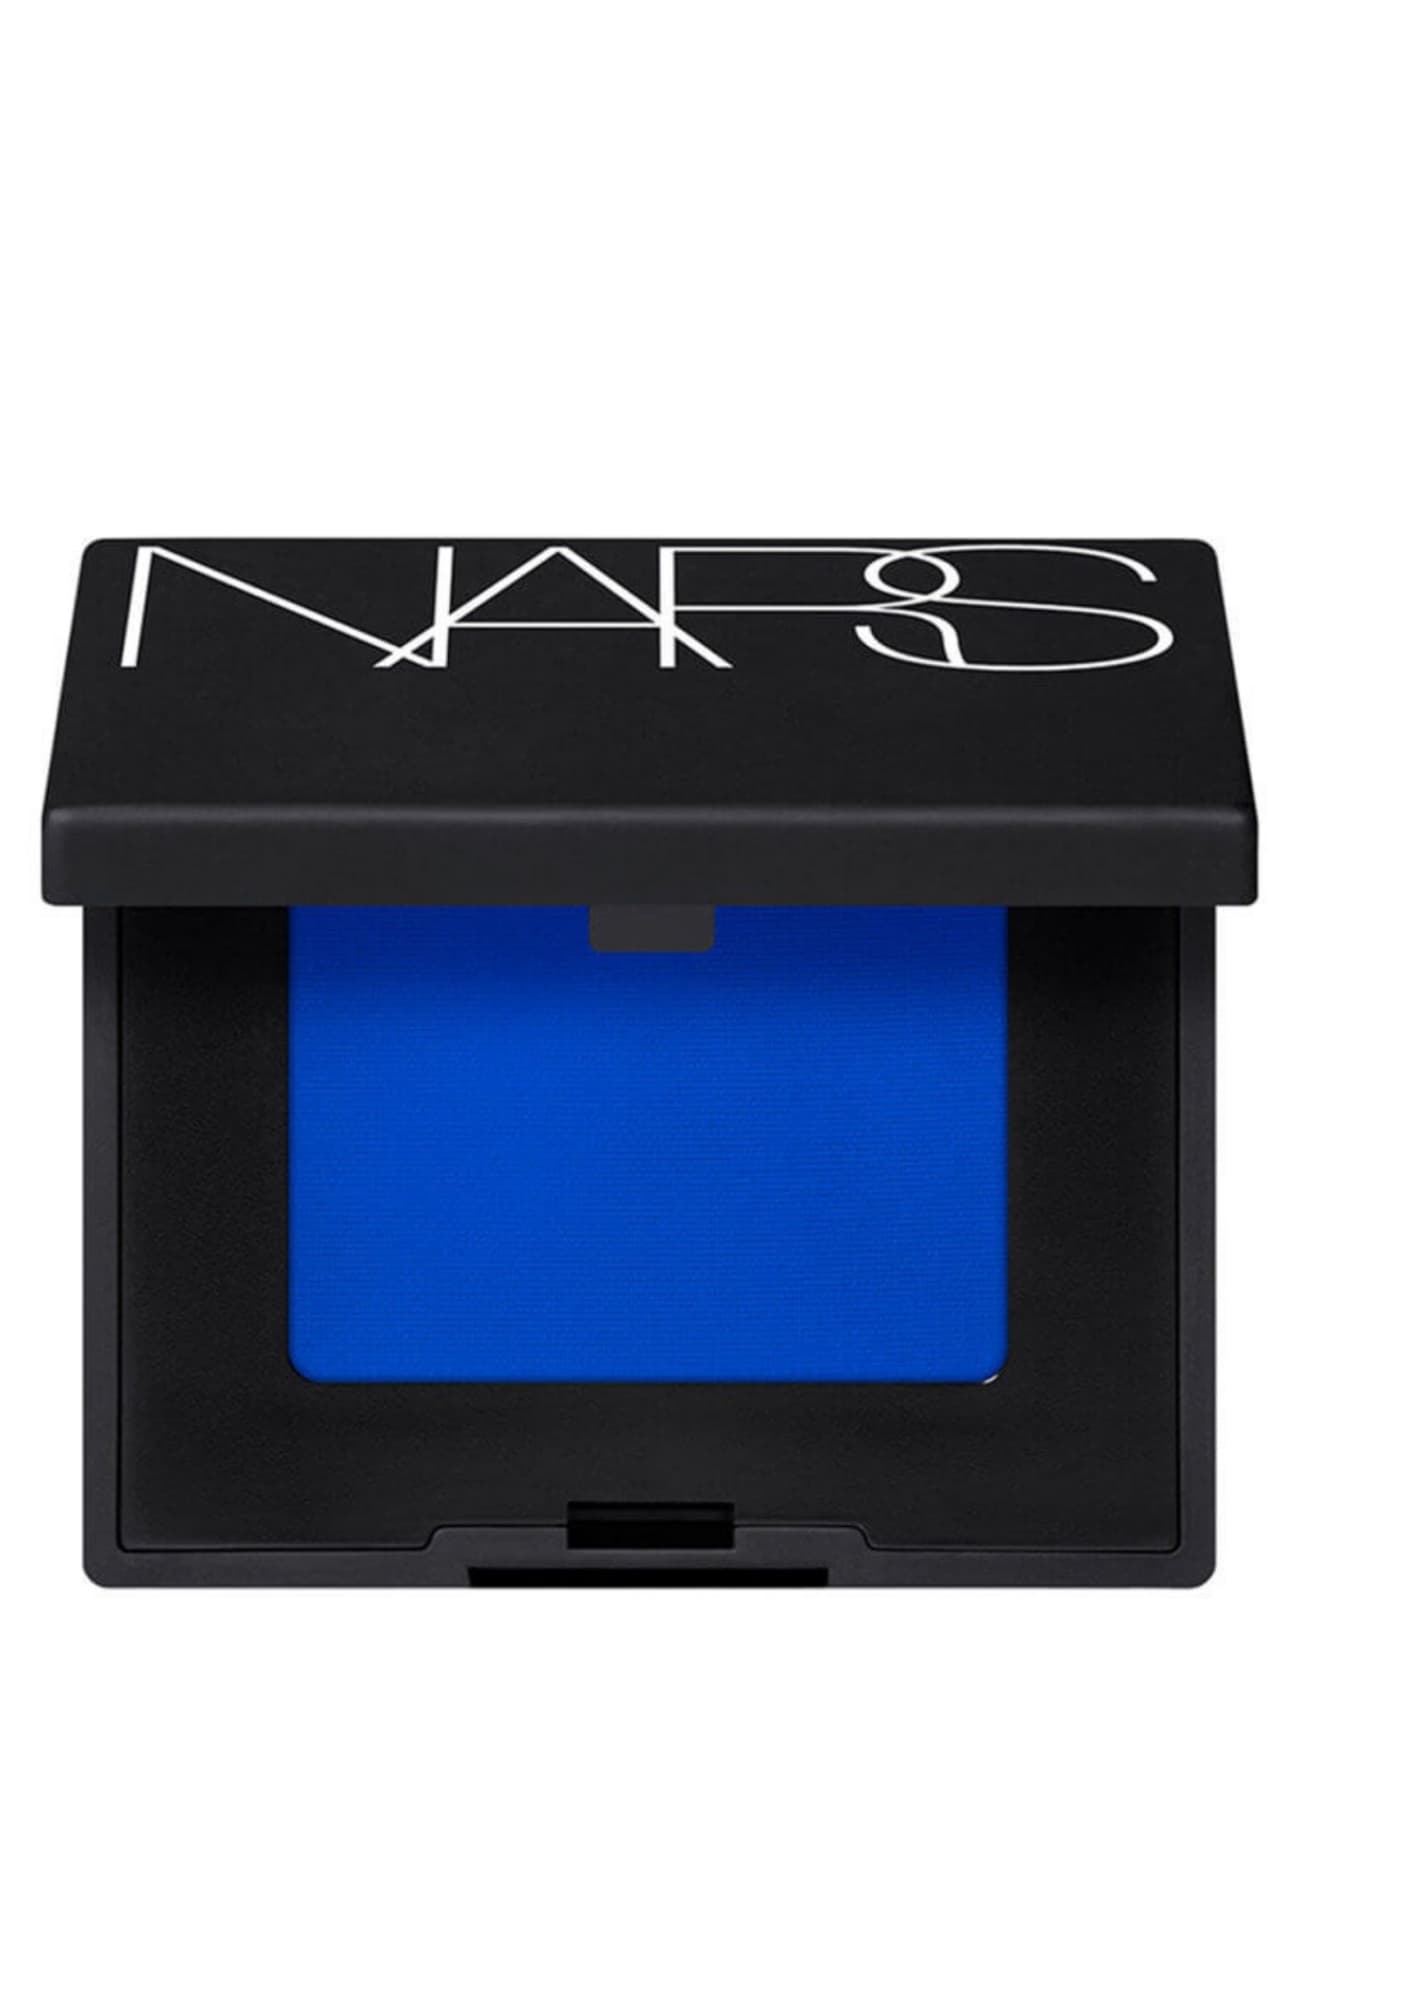 Nars, Single Eyeshadow in "Outremer" ($28)